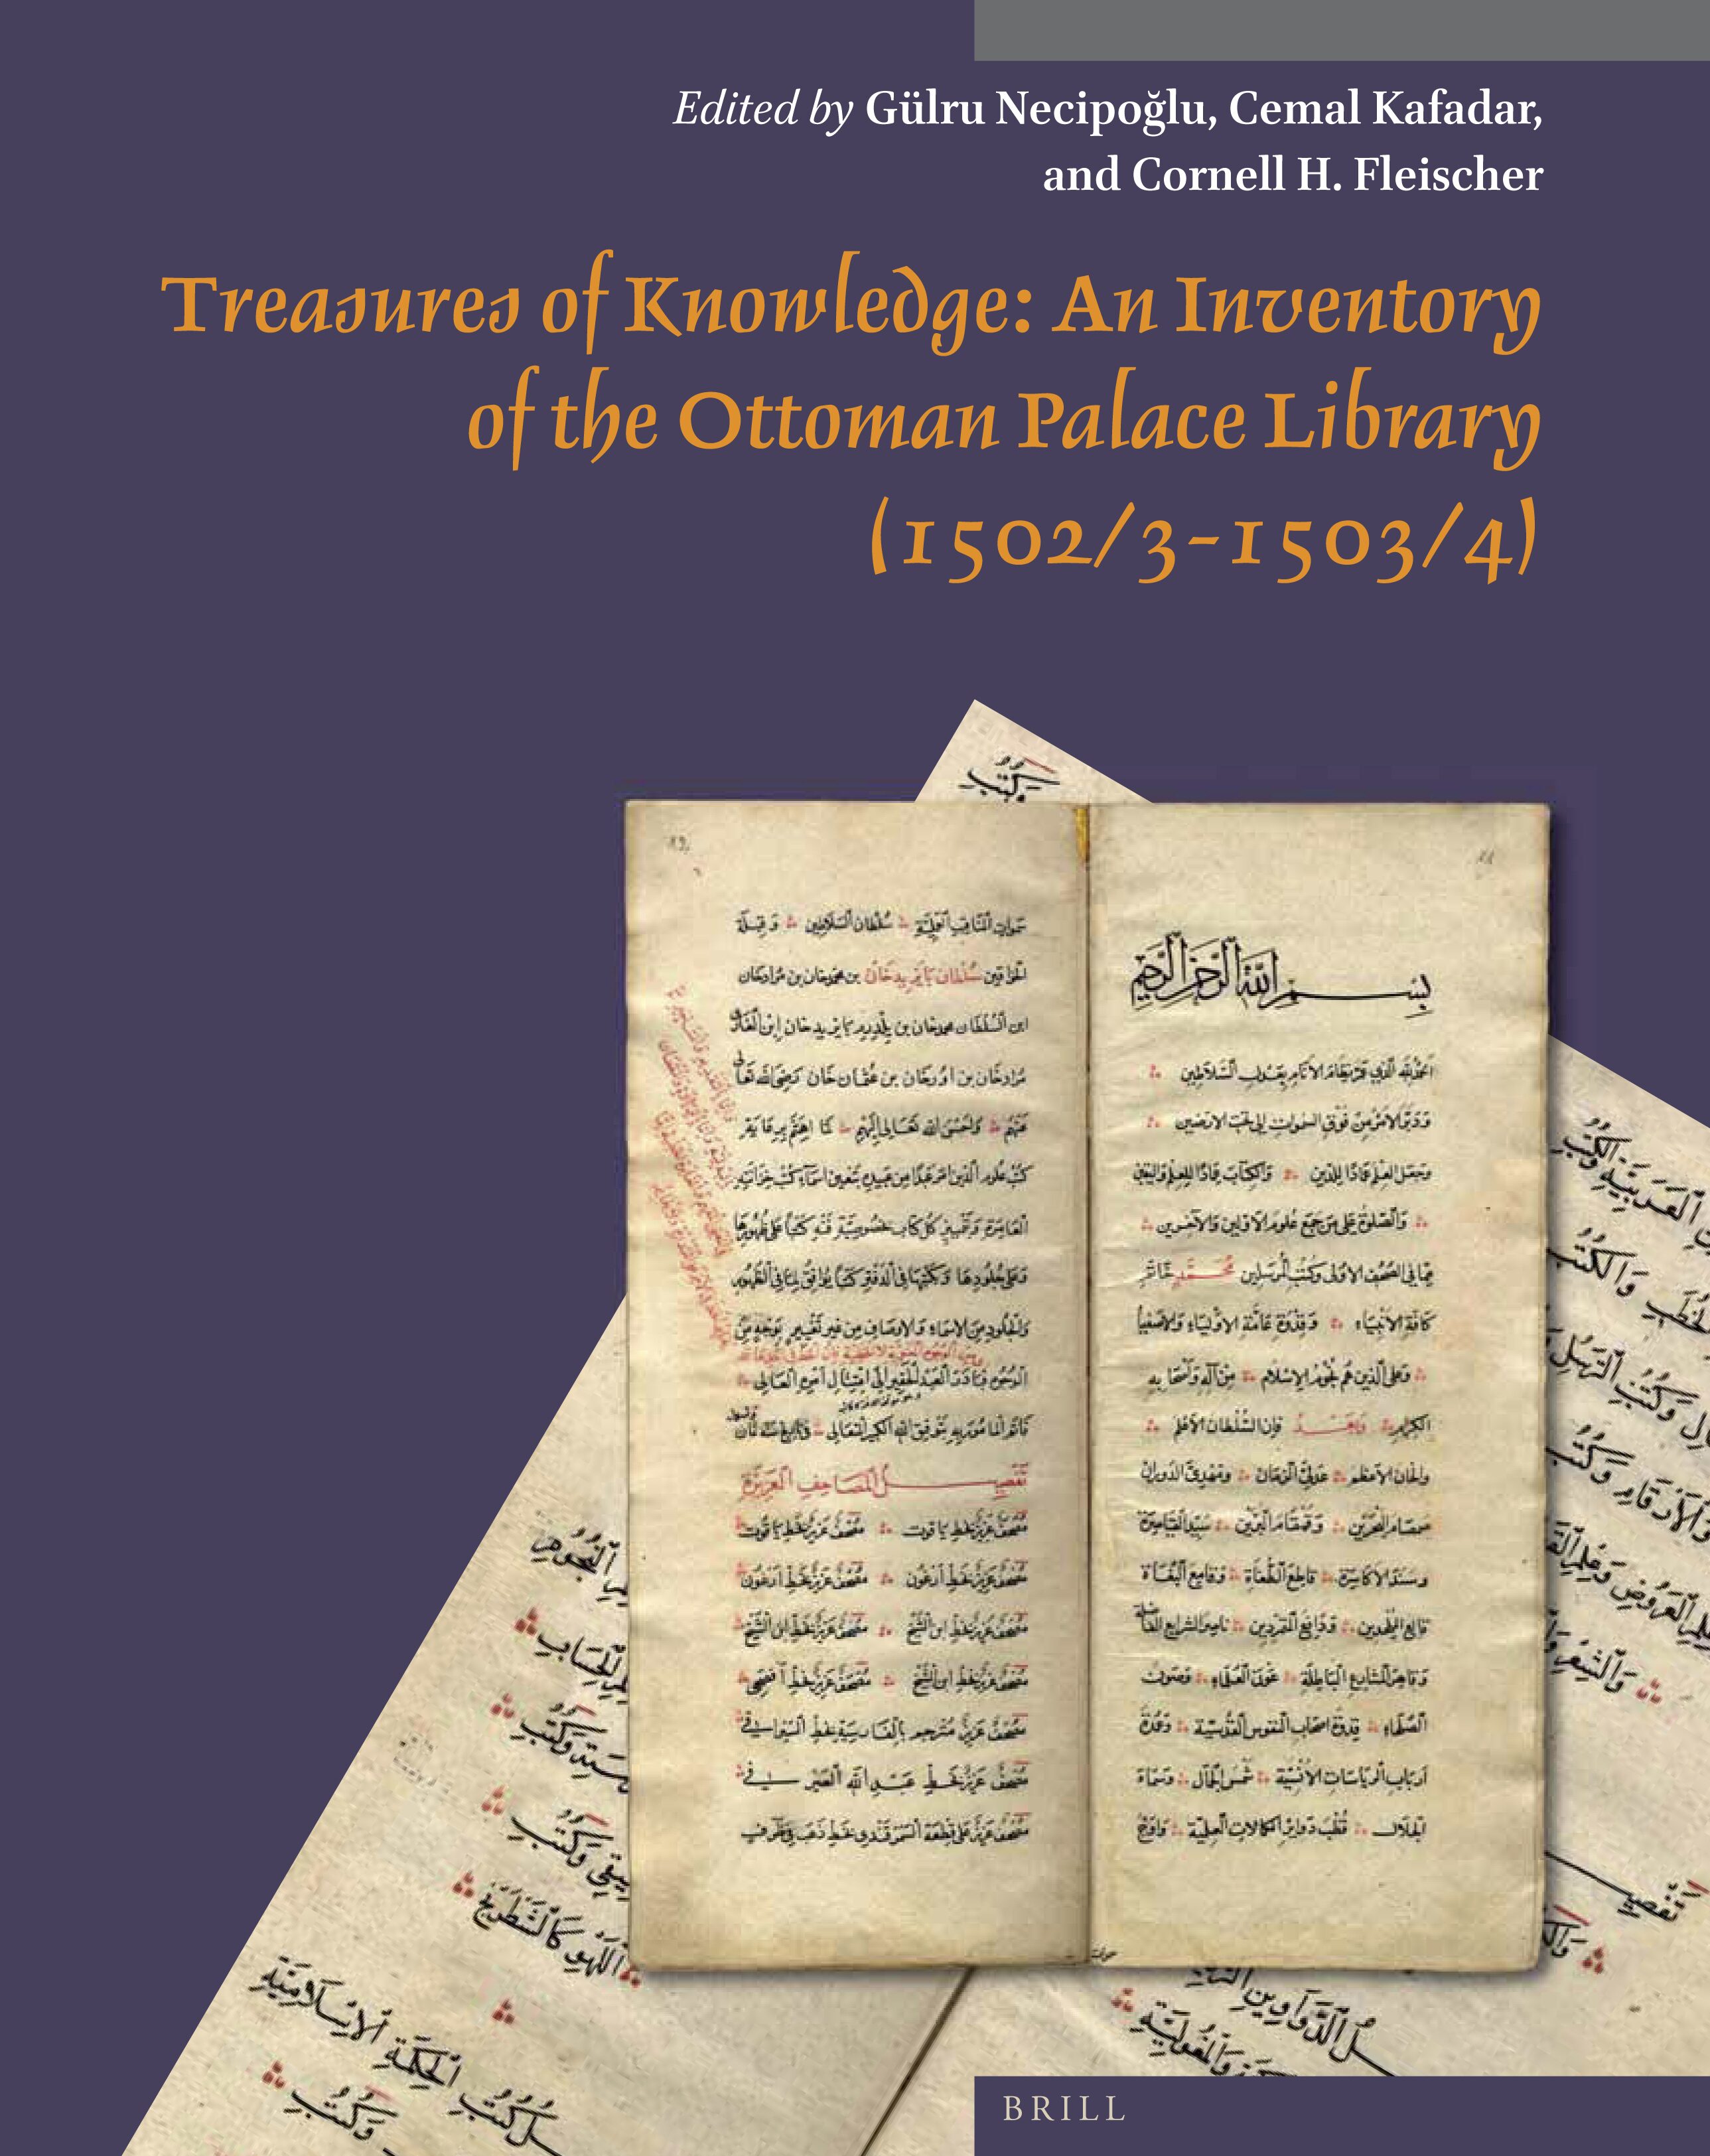 Topkapı Sarayı - <p>Volume I: Essays / Volume II: Transliteration and Facsimile "Register of Books" (Kitāb al-kutub), MS Török F. 59; Magyar Tudományos Akadémia Könyvtára Keleti Gyűjtemény (Oriental Collection of the Library of the Hungarian Academy of Sciences)</p><p><br></p><p>The subject of this two-volume publication is an inventory of manuscripts in the book treasury of the Topkapı Palace in Istanbul, commissioned by the Ottoman sultan Bayezid II from his royal librarian ʿAtufi in the year 908 (1502–3) and transcribed in a clean copy in 909 (1503–4). This unicum inventory preserved in the Oriental Collection of the Library of the Hungarian Academy of Sciences (Magyar Tudományos Akadémia Könyvtára Keleti Gyűjtemény, MS Török F. 59) records over 5,000 volumes, and more than 7,000 titles, on virtually every branch of human erudition at the time. The Ottoman palace library housed an unmatched encyclopedic collection of learning and literature; hence, the publication of this unique inventory opens a larger conversation about Ottoman and Islamic intellectual/cultural history. The very creation of such a systematically ordered inventory of books raises broad questions about knowledge production and practices of collecting, readership, librarianship, and the arts of the book at the dawn of the sixteenth century.&nbsp;</p><p><br></p><p>The first volume contains twenty-eight interpretative essays on this fascinating document, authored by a team of scholars from diverse disciplines, including Islamic and Ottoman history, history of science, arts of the book and codicology, agriculture, medicine, astrology, astronomy, occultism, mathematics, philosophy, theology, law, mysticism, political thought, ethics, literature (Arabic, Persian, Turkish/Turkic), philology, and epistolary. Following the first three essays by the editors on implications of the library inventory as a whole, the other essays focus on particular fields of knowledge under which books are catalogued in MS Török F. 59, each accompanied by annotated lists of entries. The second volume presents a transliteration of the Arabic manuscript, which also features an Ottoman Turkish preface on method, together with a reduced-scale facsimile.</p>